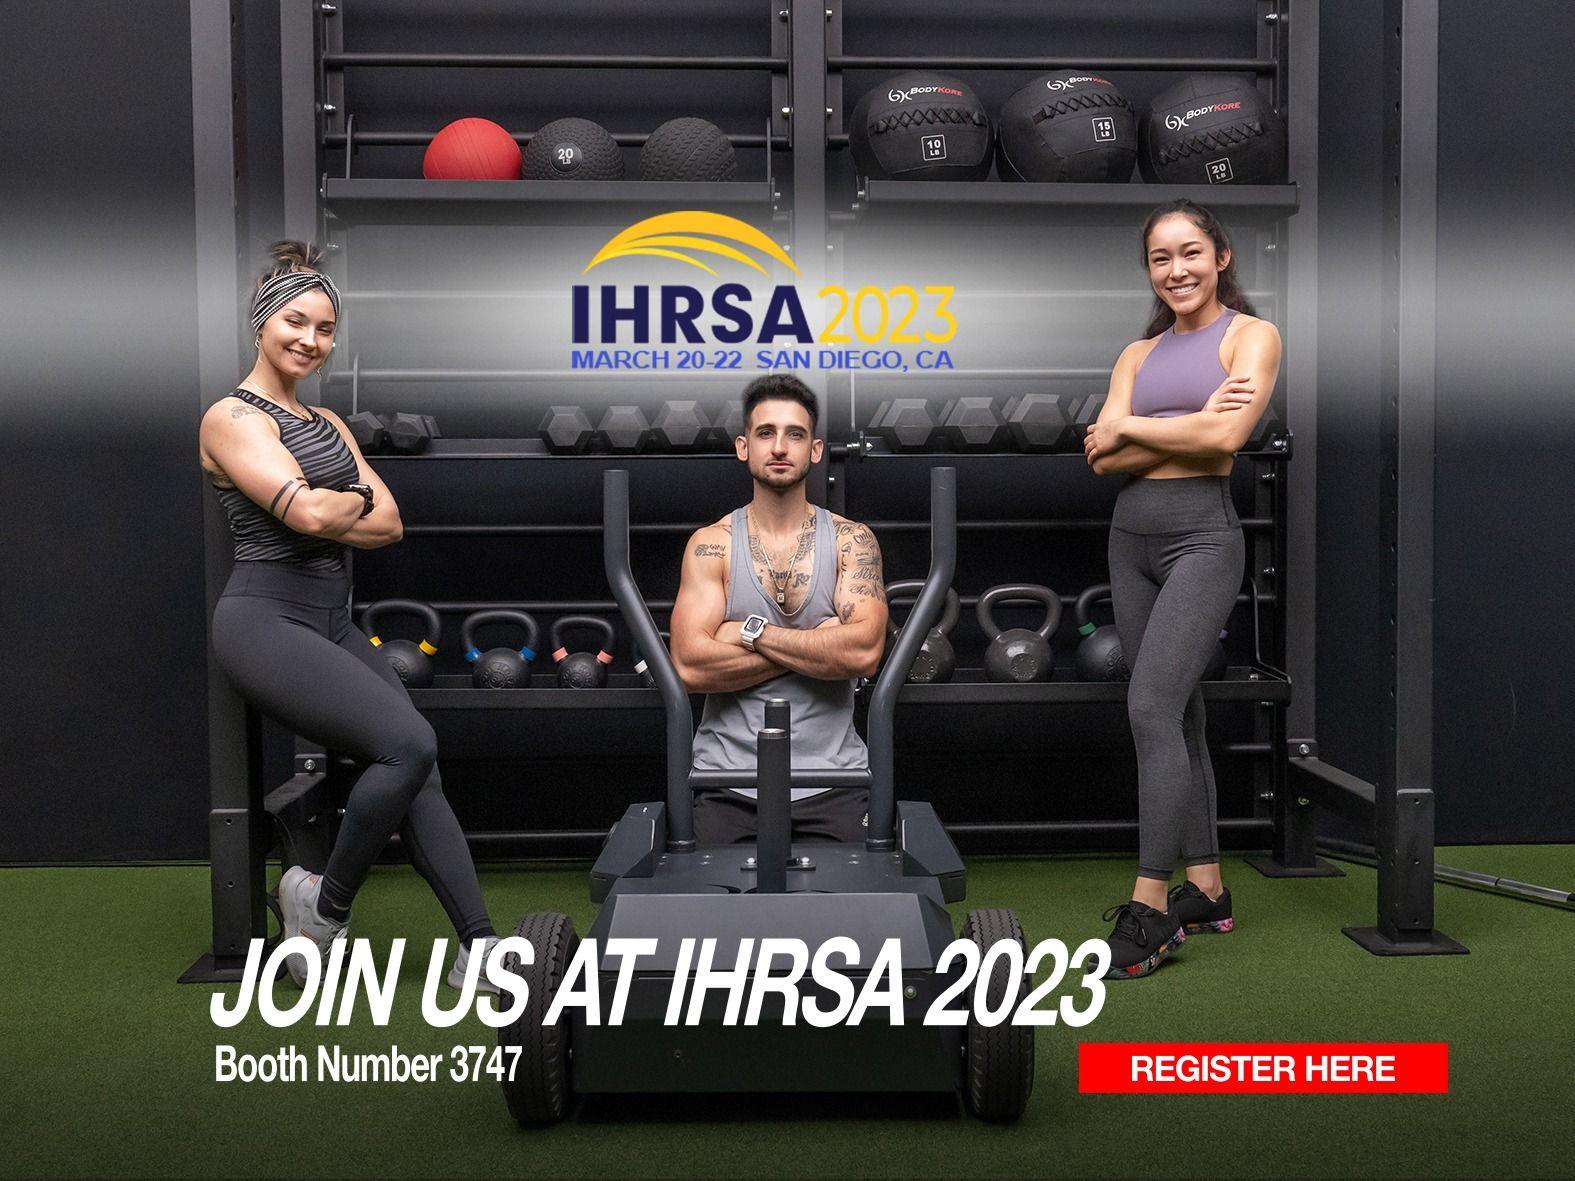 BodyKore to Debut Revolutionary Smart Sled Pro at IHRSA 2023